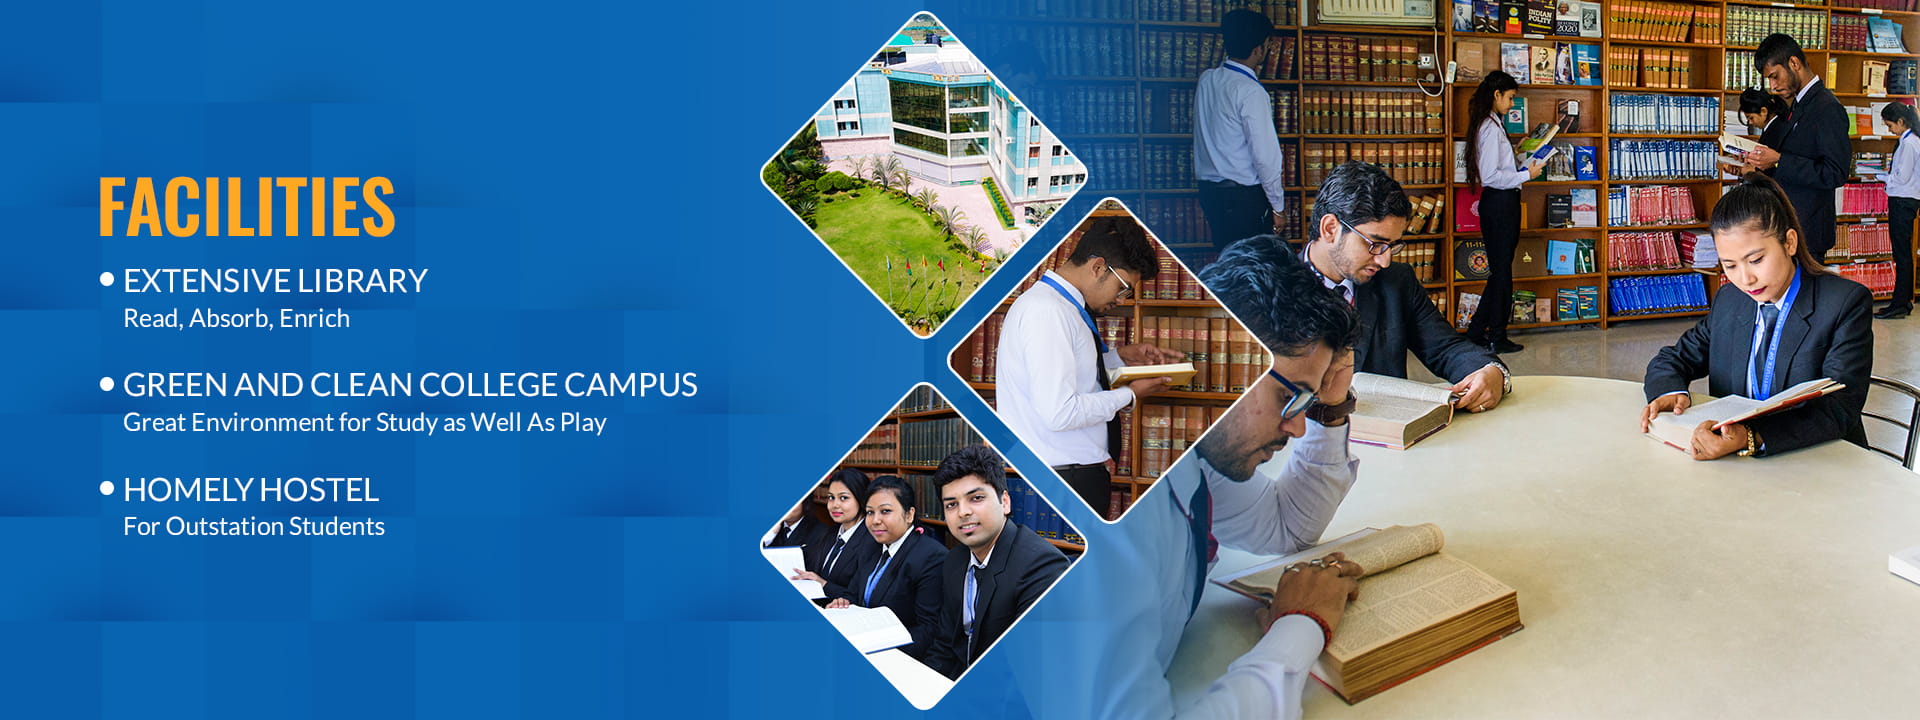 Law College in Moradabad, Best Law College in Bareilly Region